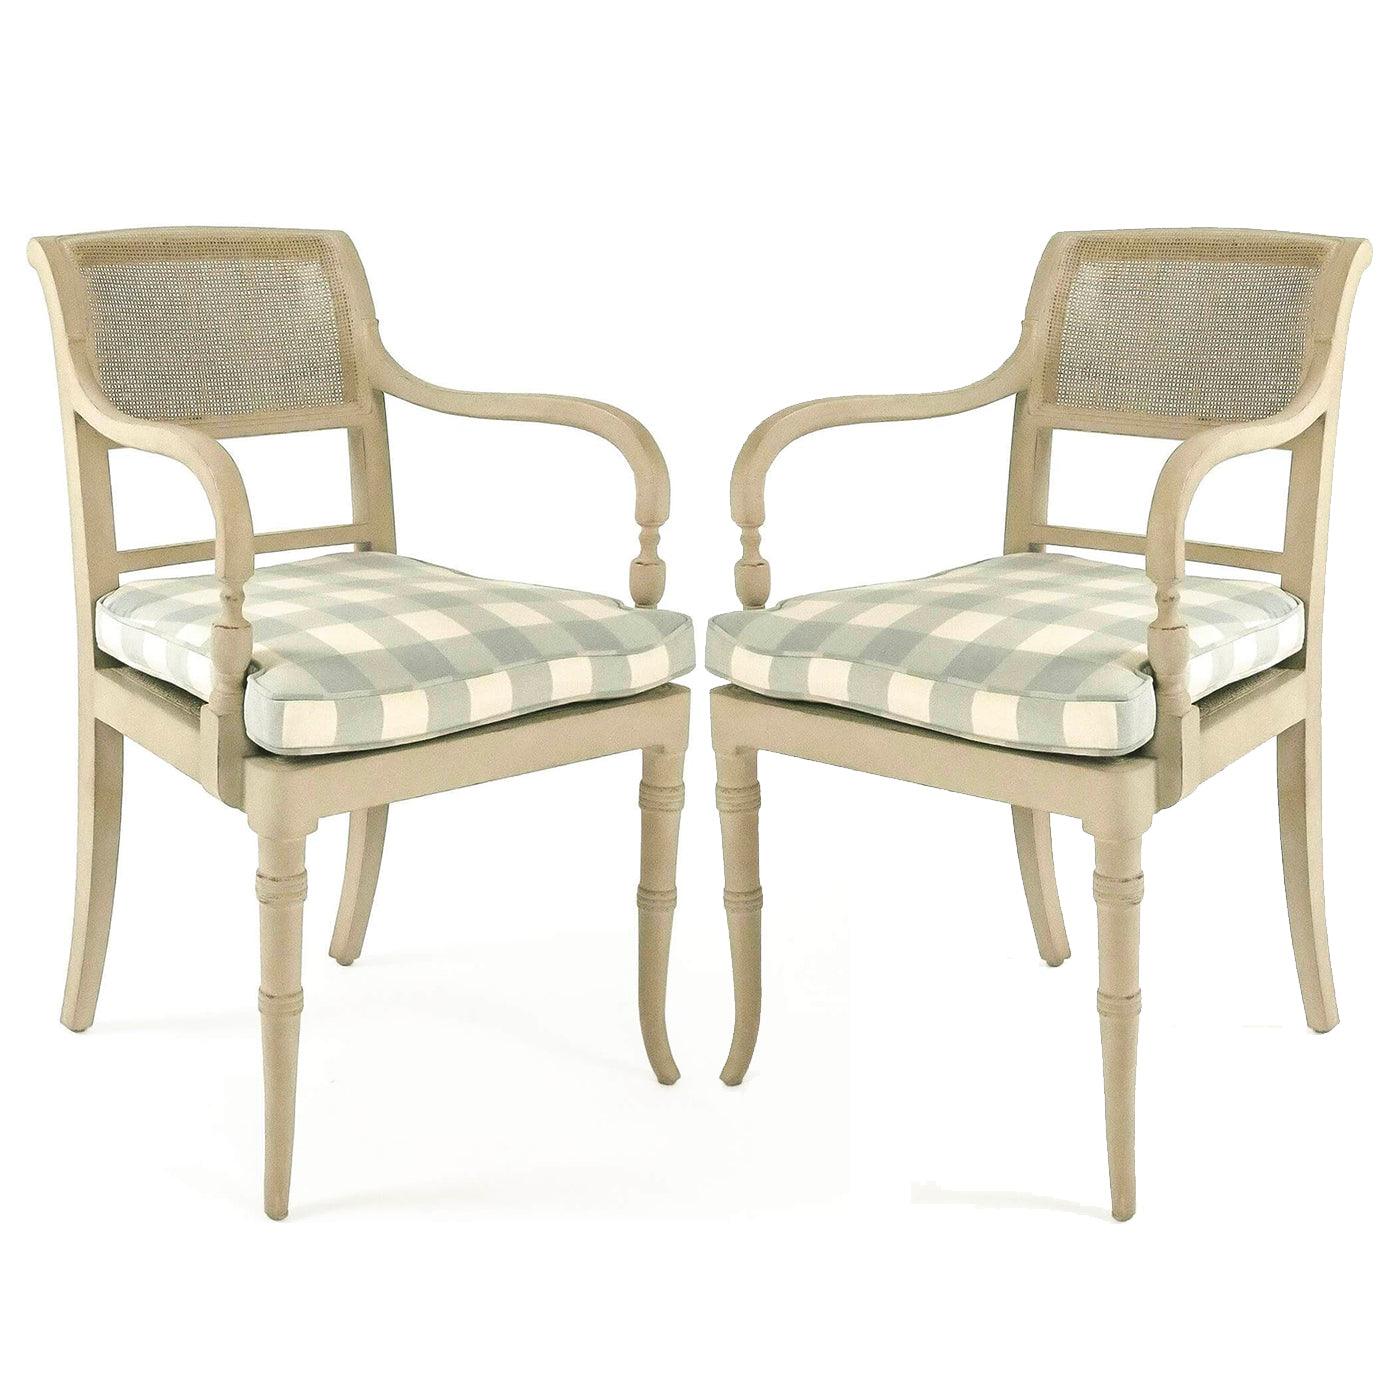 Country Cottage Chic Arm Chairs - Belle Escape